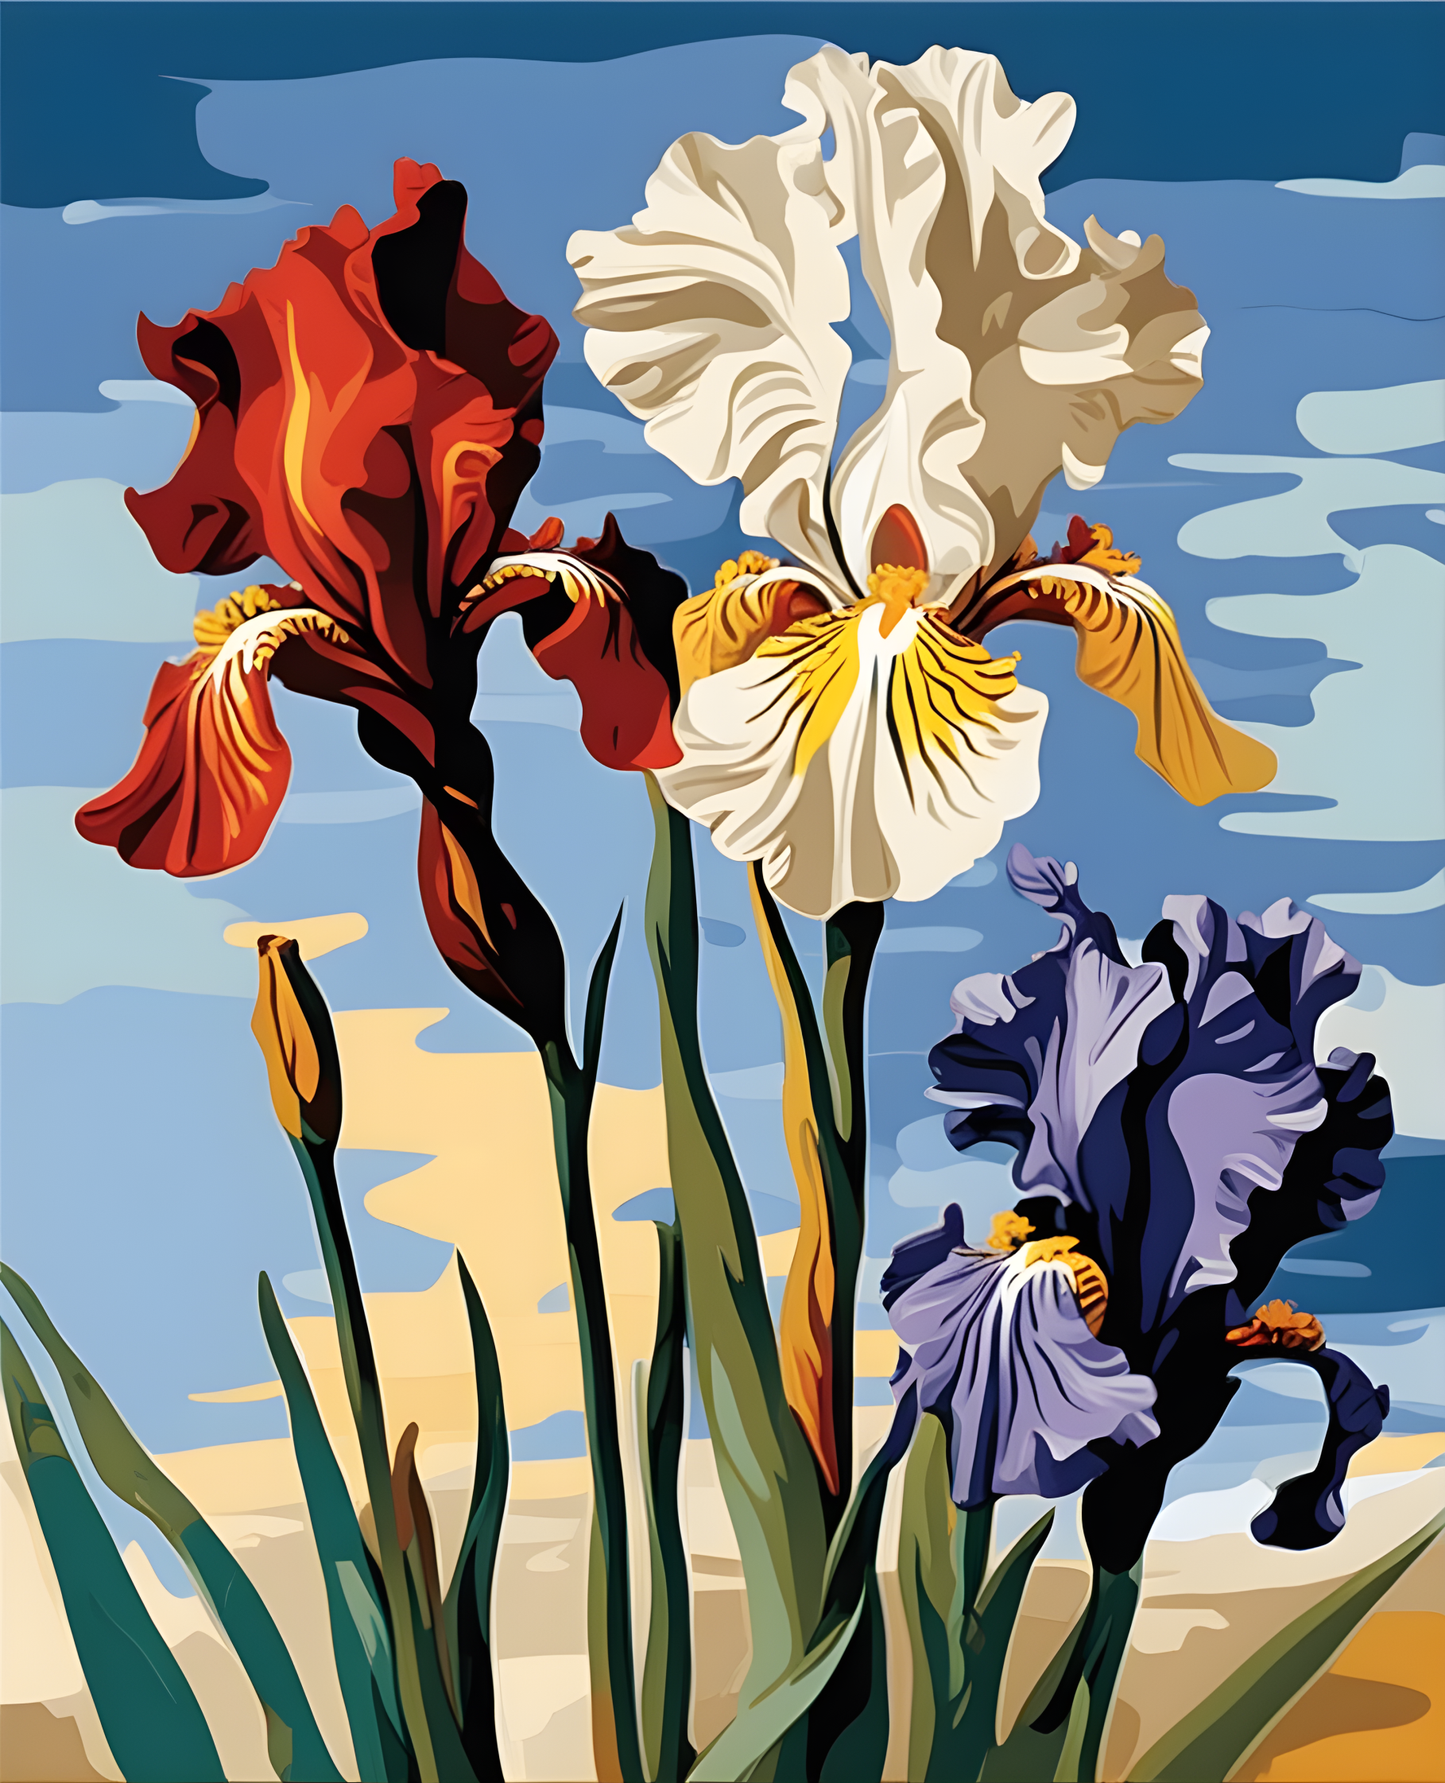 Flowers Collection OD (68) - Irises - Van-Go Paint-By-Number Kit